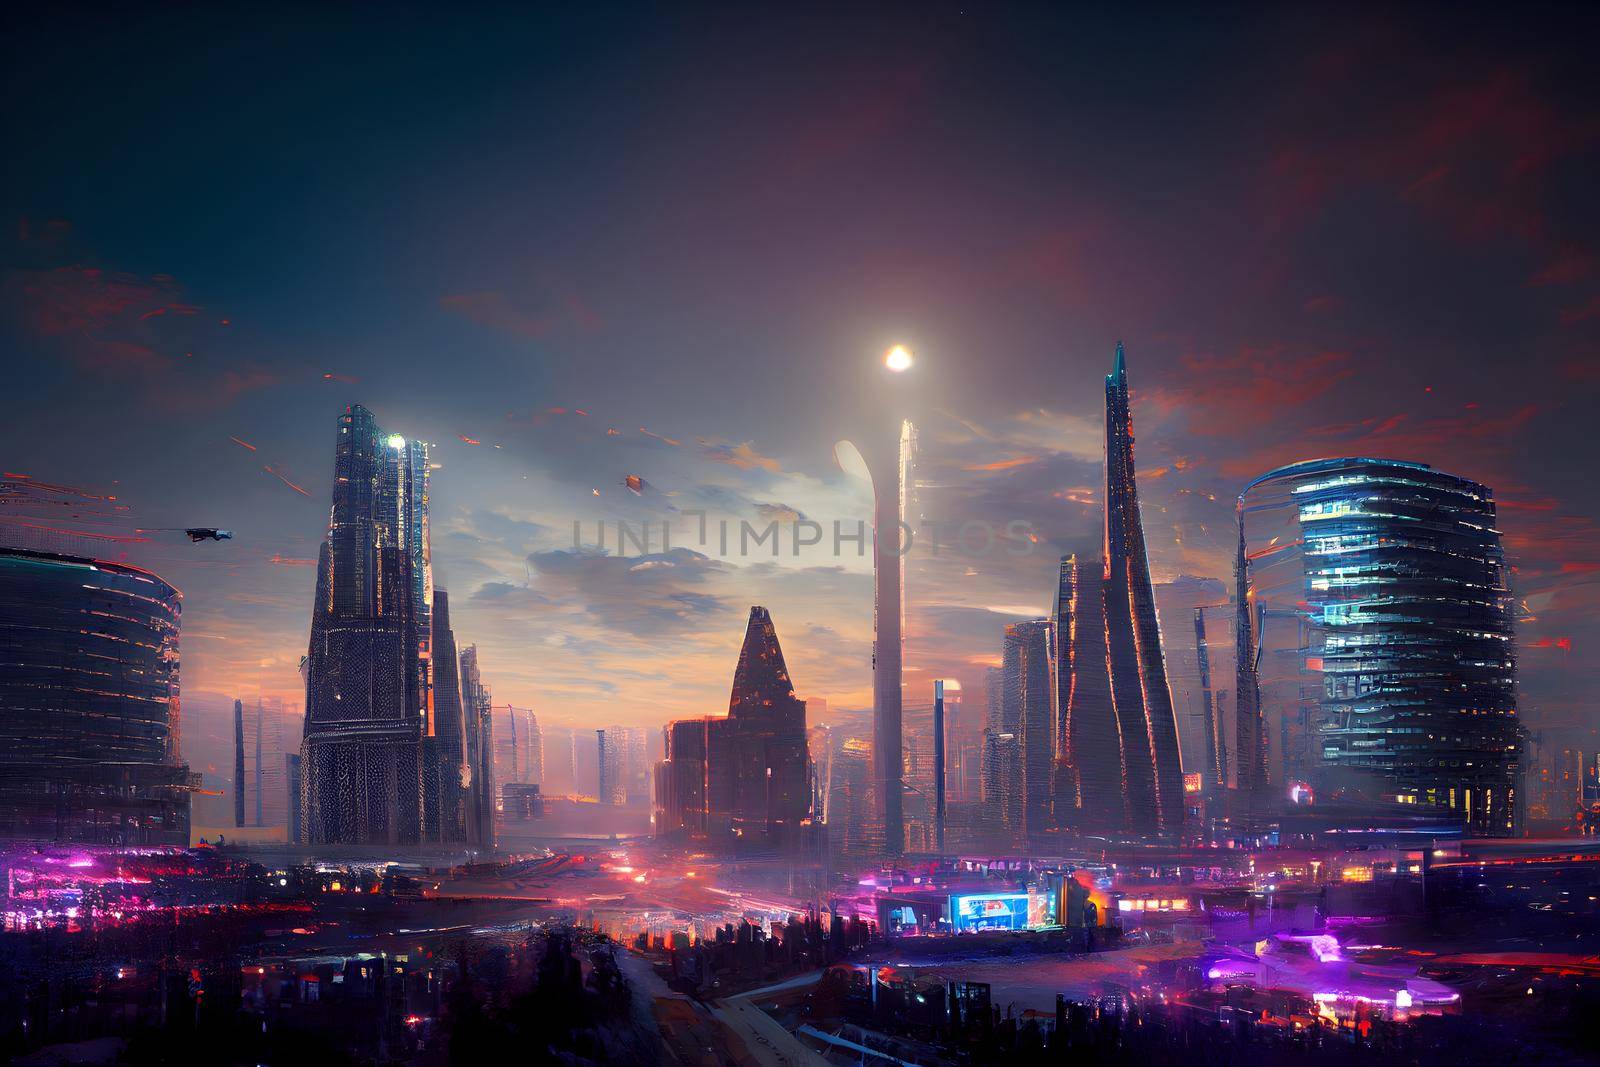 abstract futuristic night utopian cityscape, neural network generated art. Digitally generated image. Not based on any actual scene or pattern.